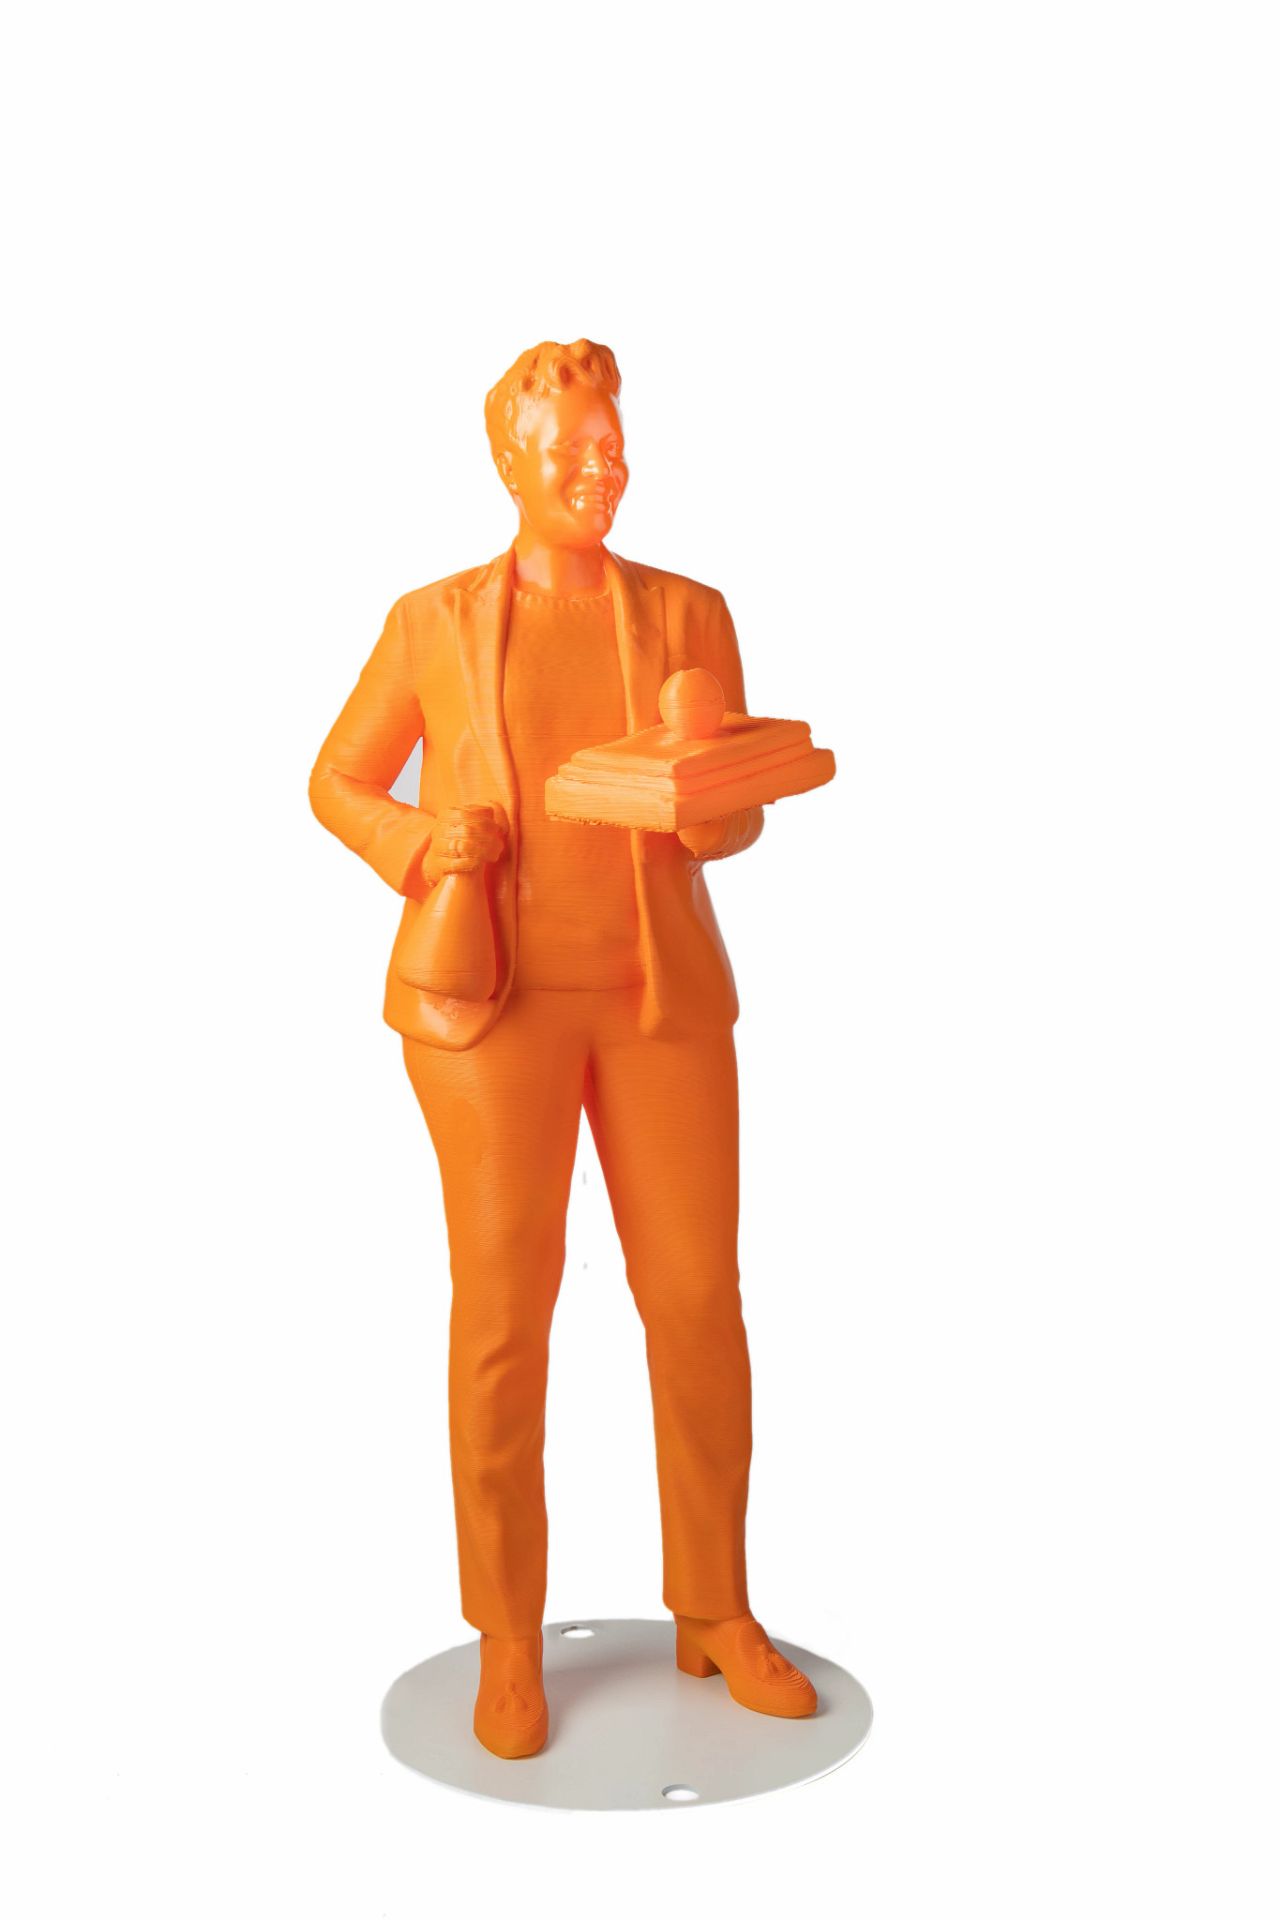 Orange model of a person standing, holding a piles of books with an apple on top.